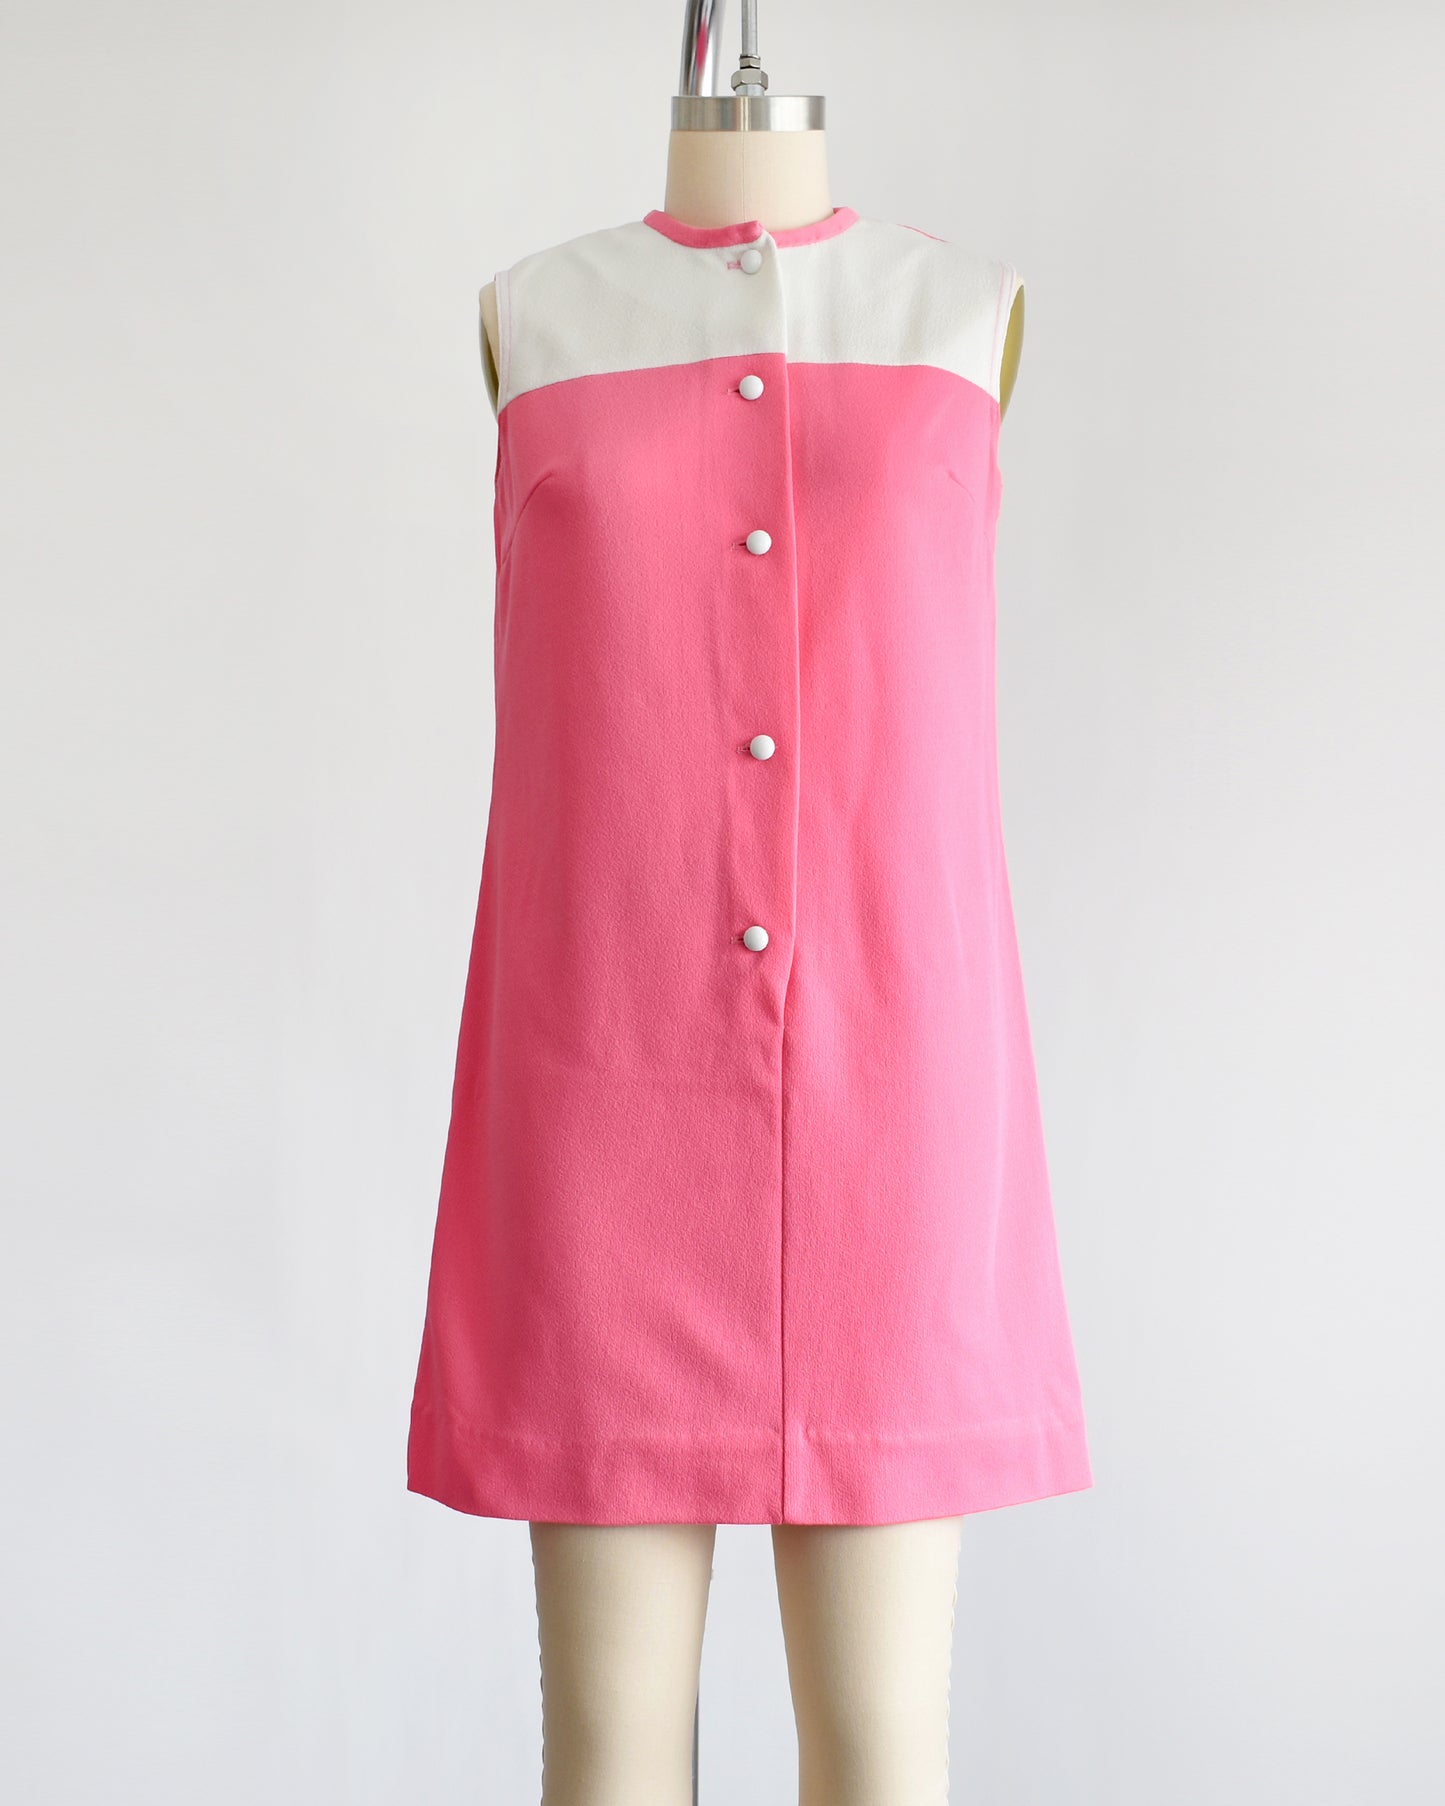 a vintage 1960s pink and white mod mini dress that has five white buttons down the front.